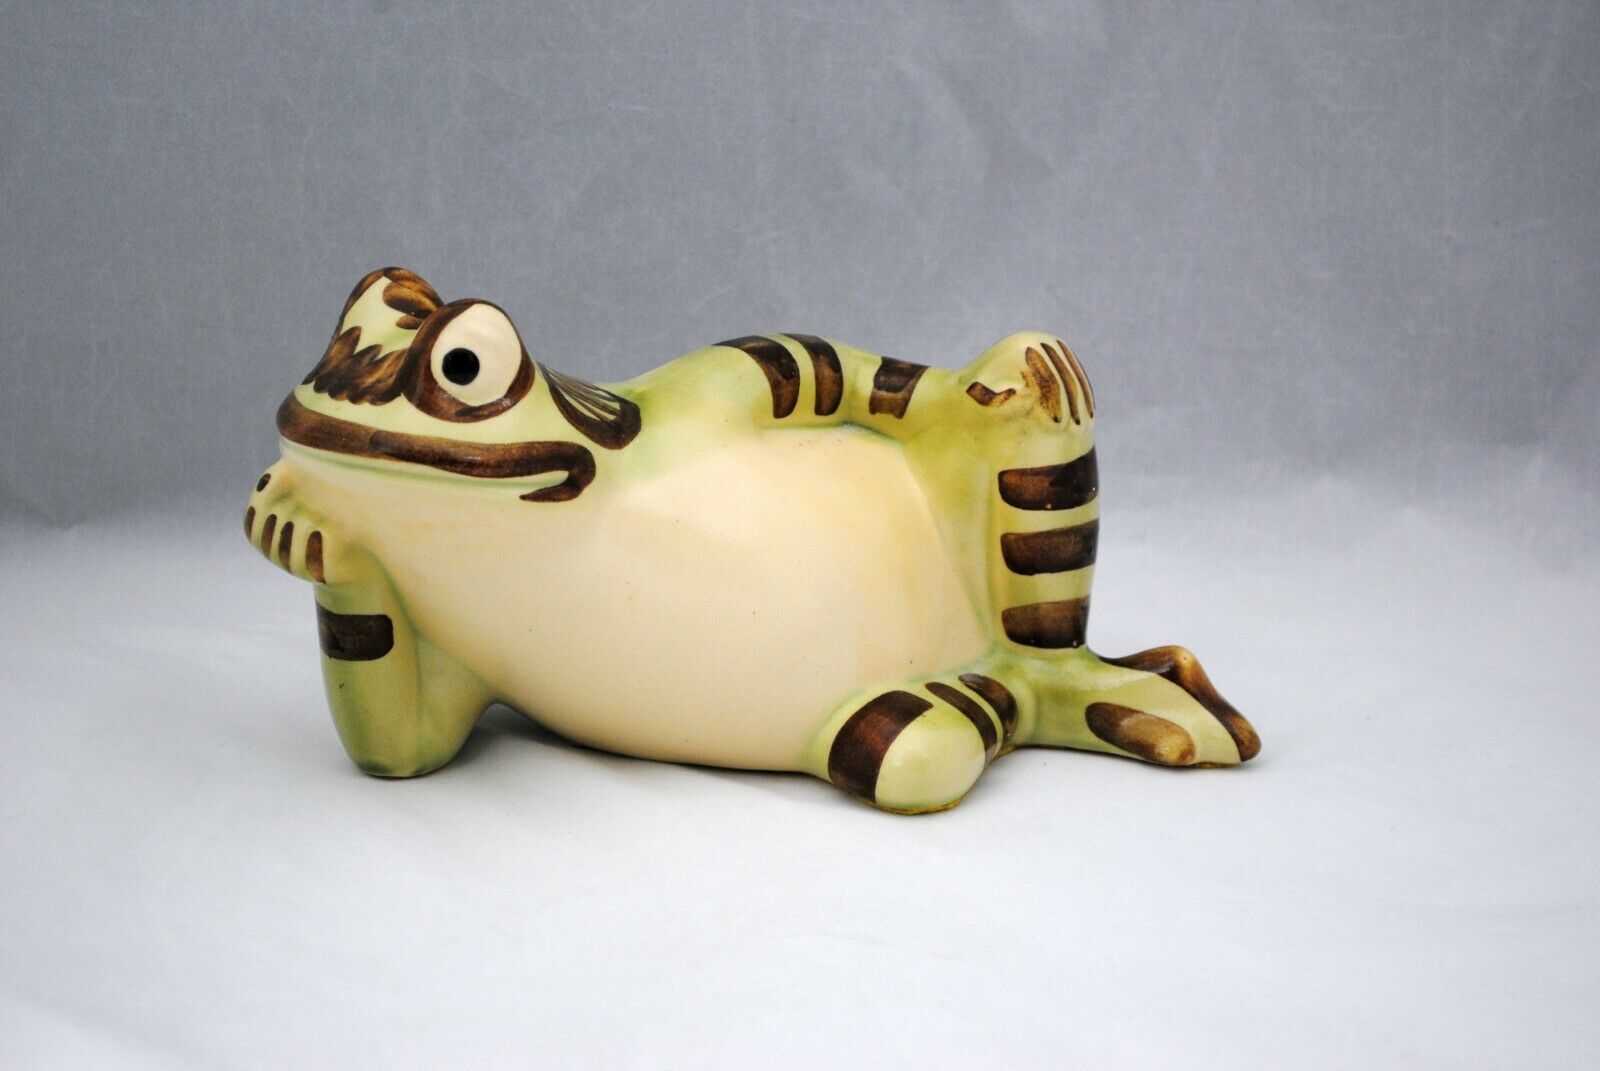 Vintage Mccoy Laying Reclining Smiling Frog Figurine Garden Decoration